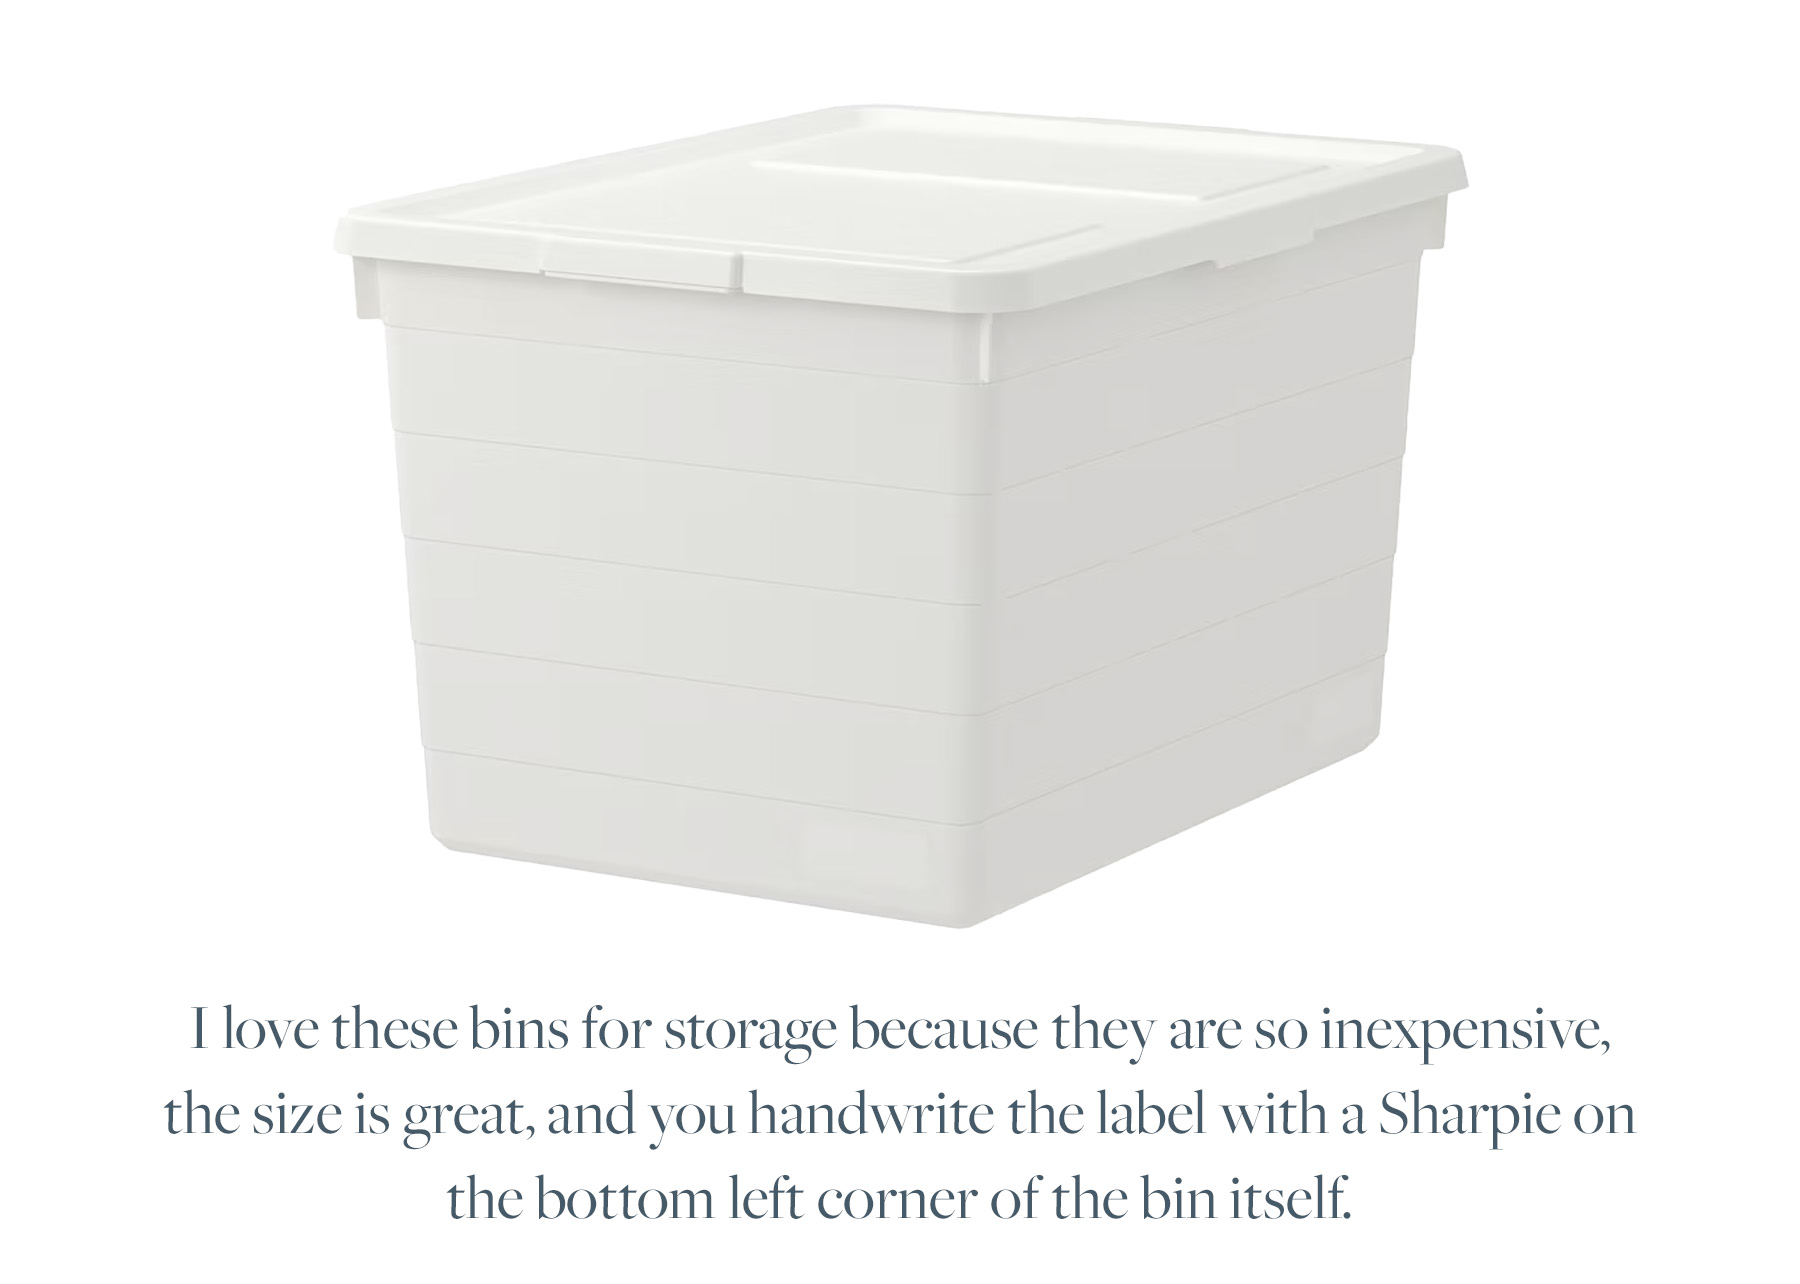 I love these bins for storage because they are so inexpensive, the size is great, and you handwrite the label with a Sharpie on the bottom left corner of the bin itself.